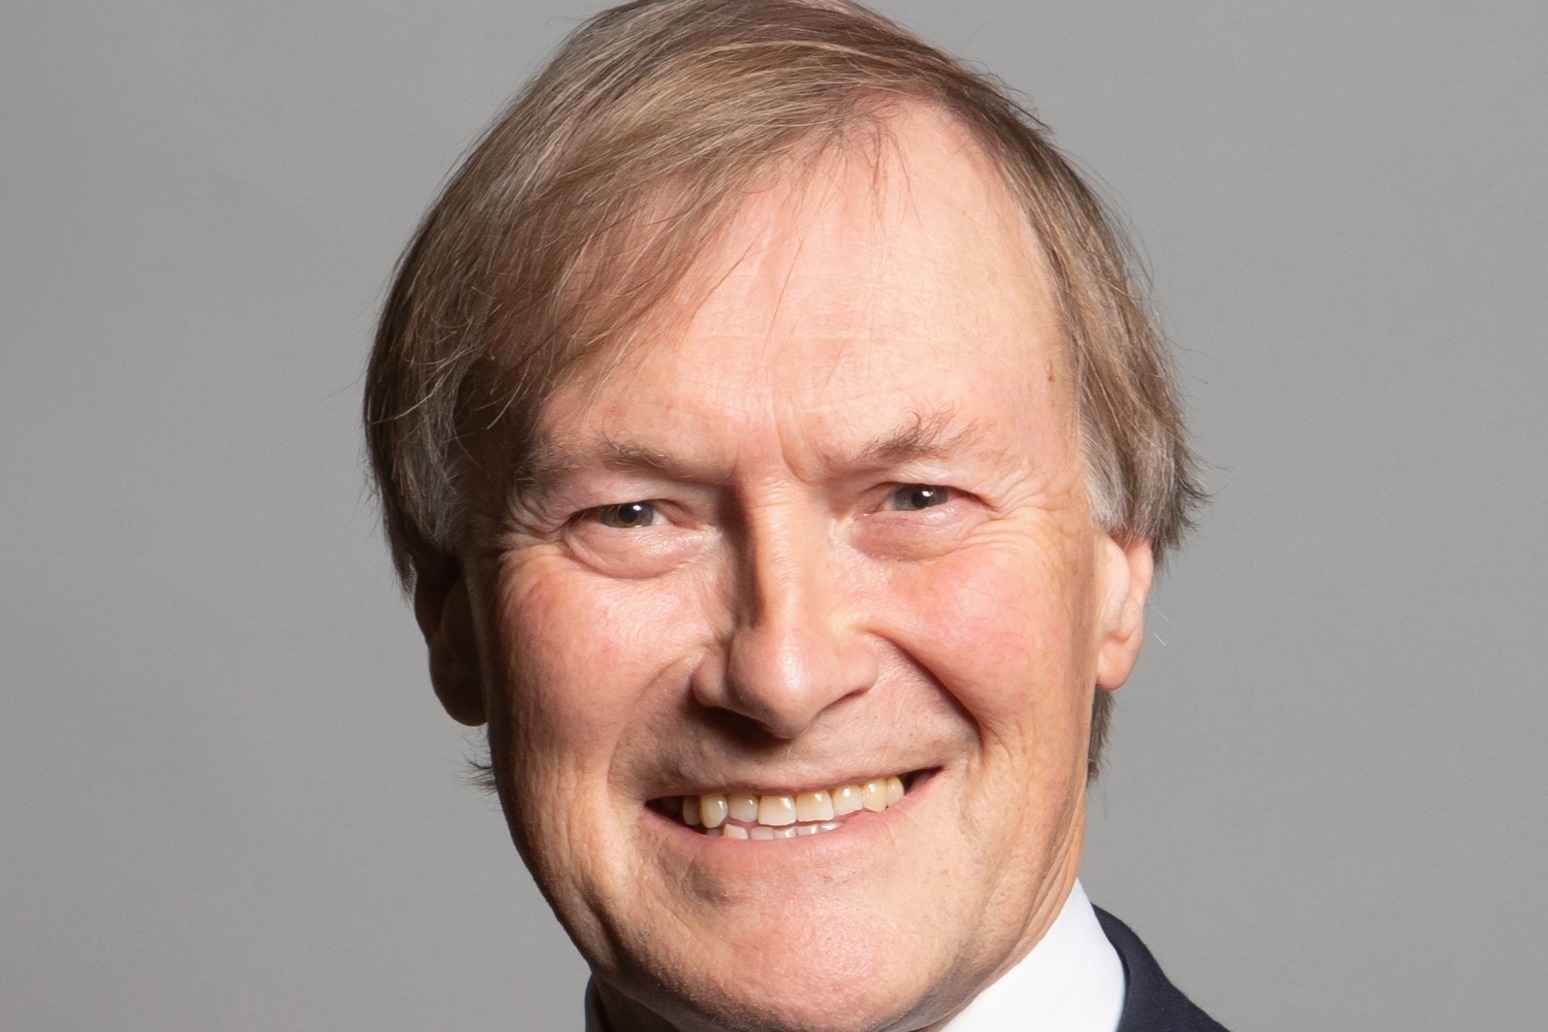 Tory MP Sir David Amess dead after being stabbed at constituency meeting 